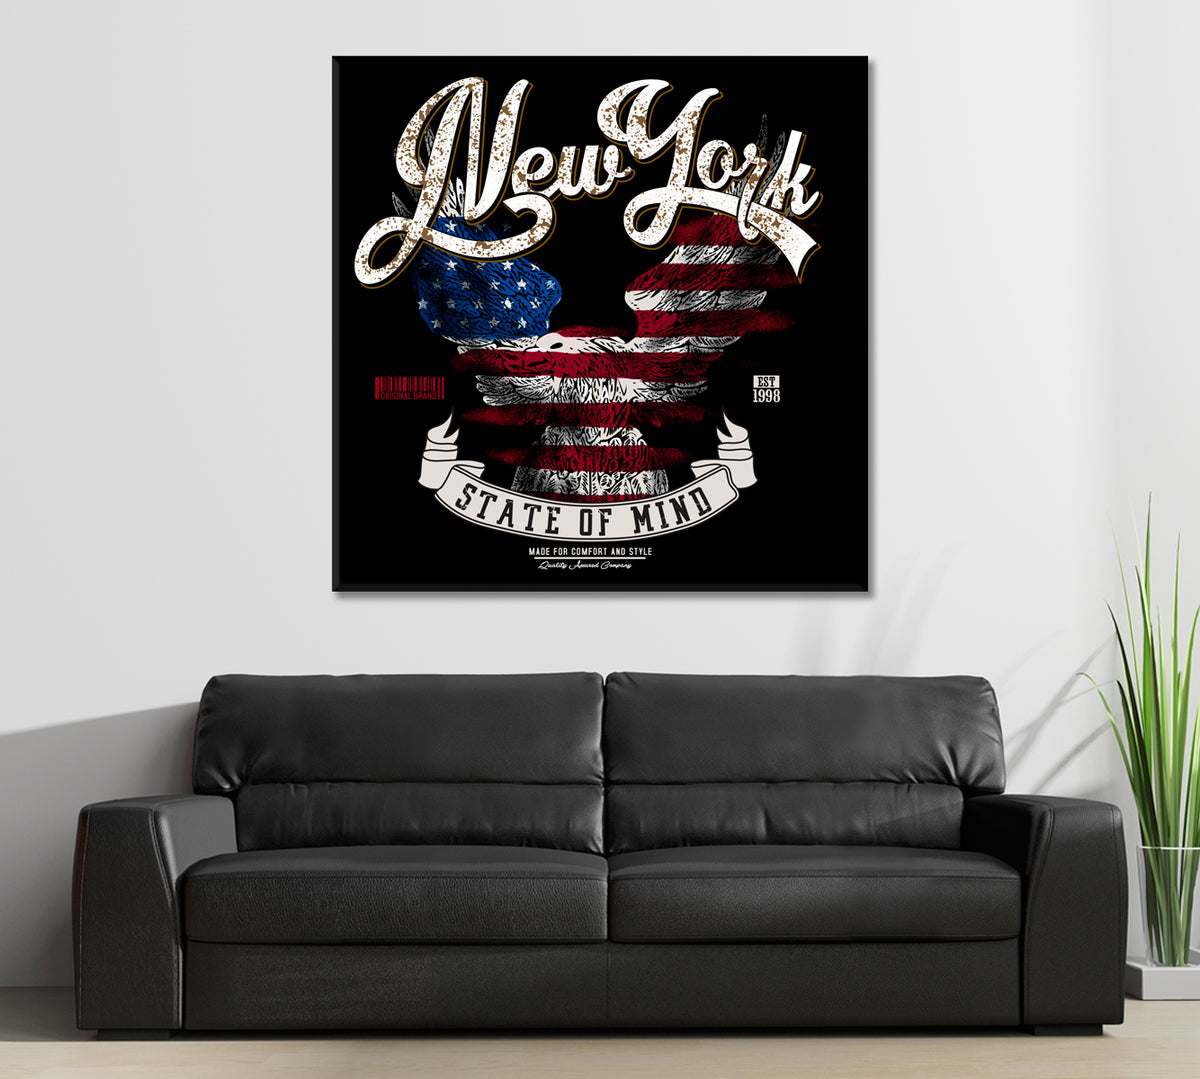 NEW YORK New Generation Vintage Poster Posters, Flags Giclee Print Artesty 1 Panel 12"x12" 